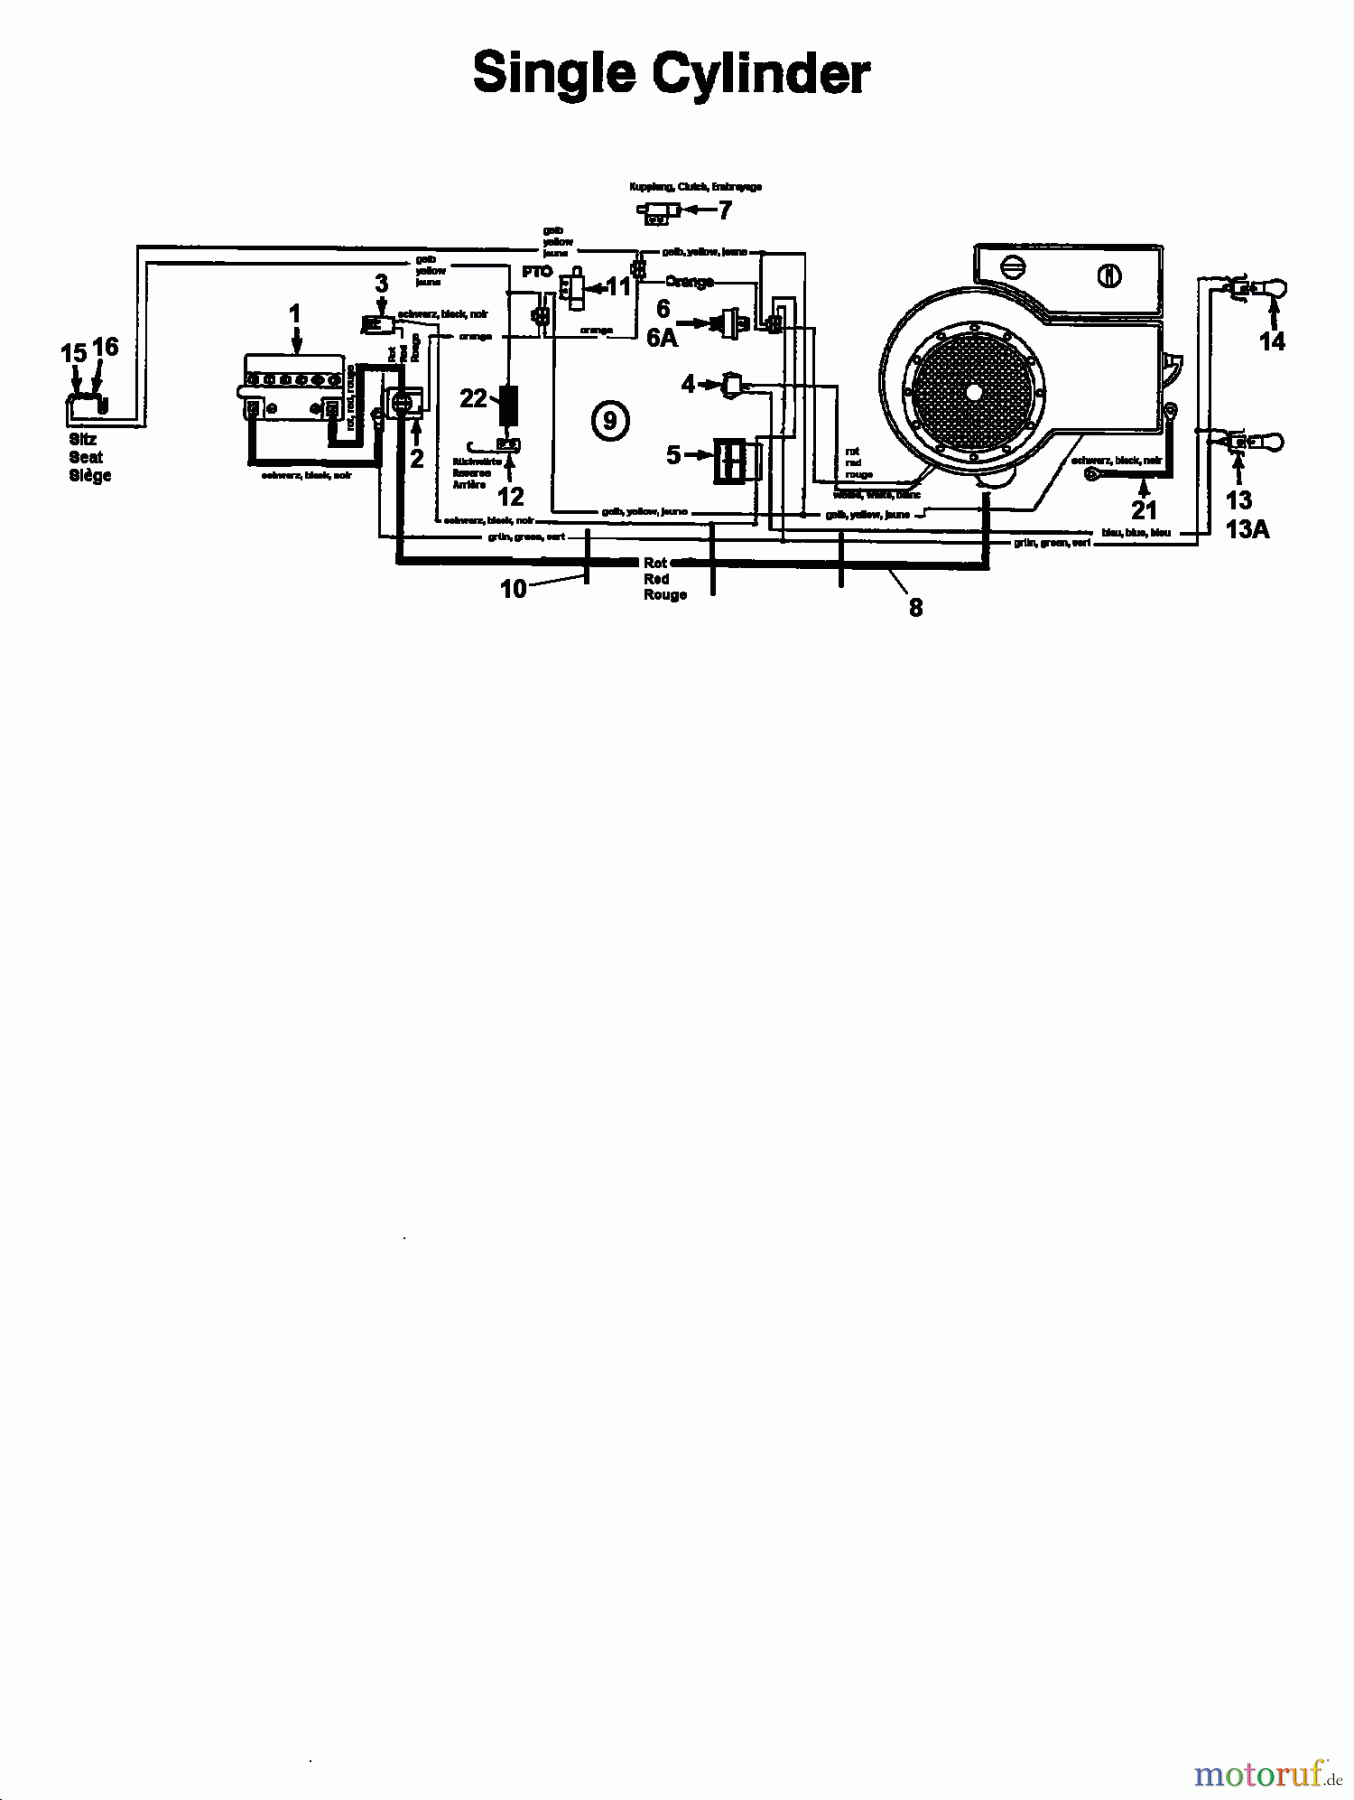  Columbia Lawn tractors 114/107 N 133S619G626  (1993) Wiring diagram single cylinder